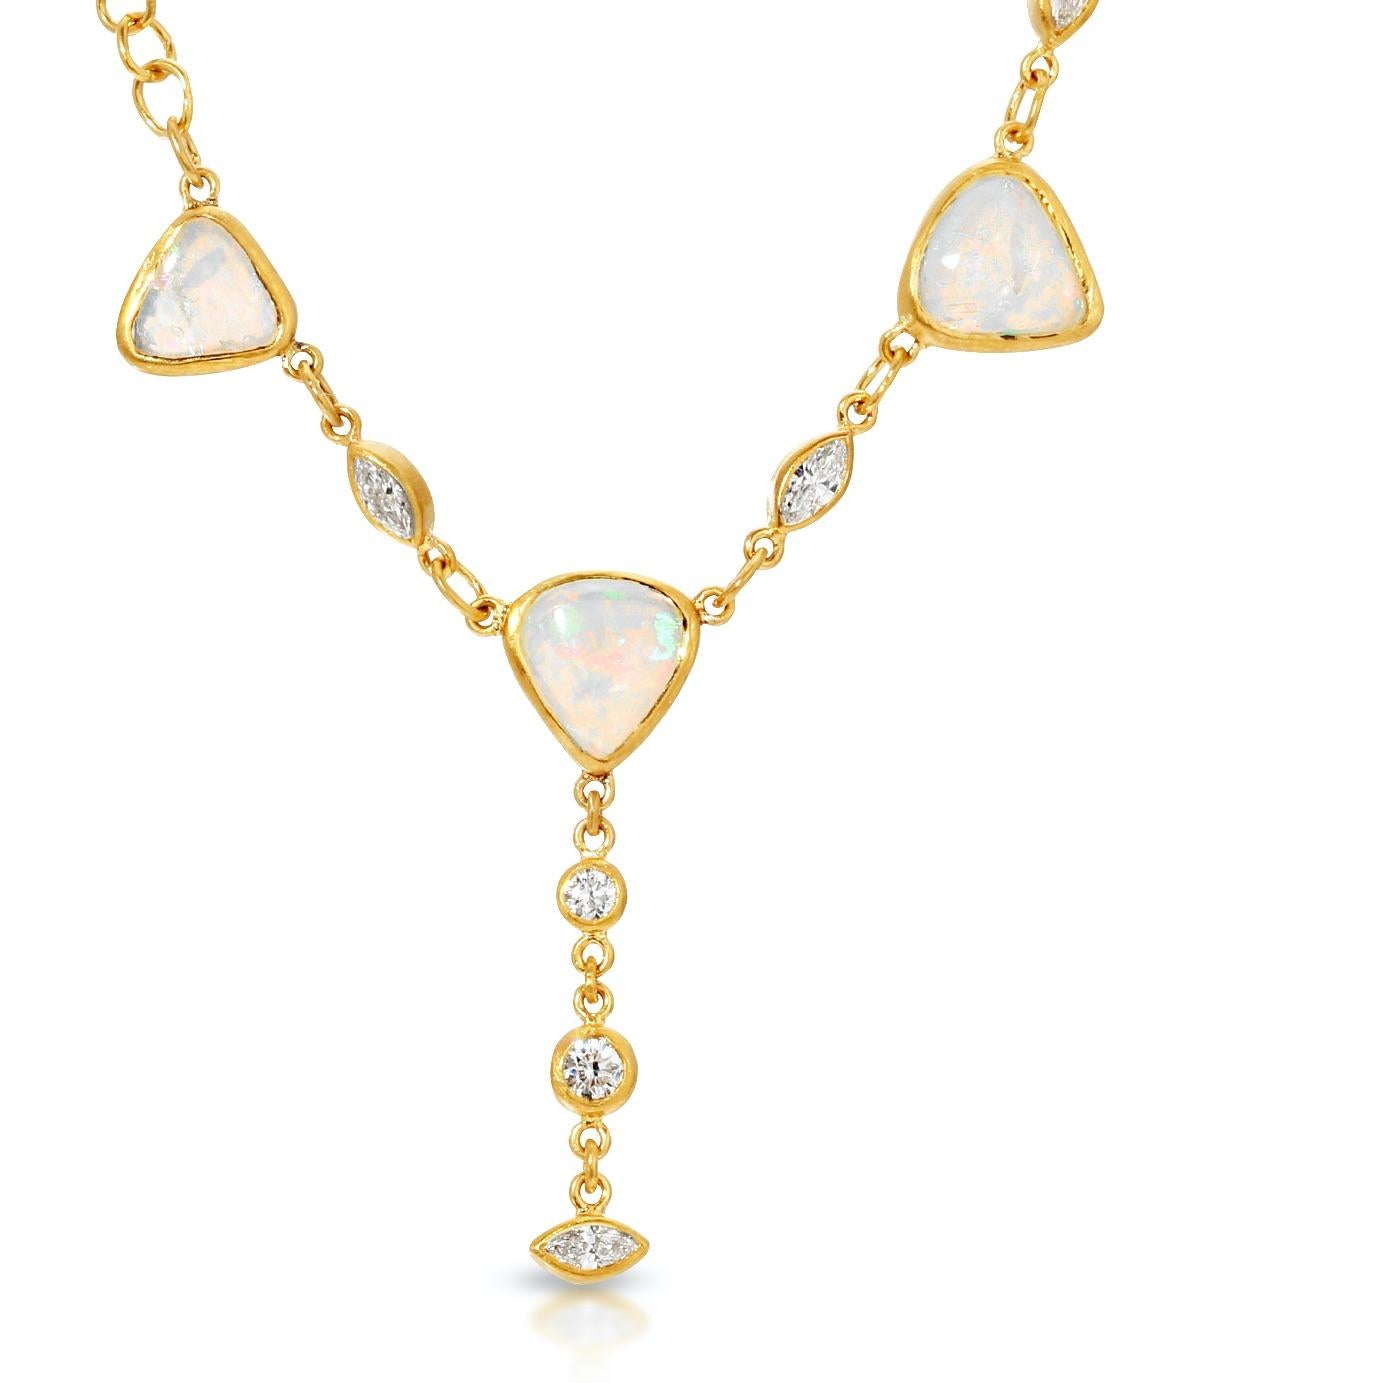 This  1.88ct Australian Crystal Opal Necklace is bezel set with .25ct vs quality bezel set Round and Marquis Diamonds.  The 18k Matte Yellow Gold chain is all handmade in my studio in Los Angeles by my team of master craftsmen and me.  All Diamonds